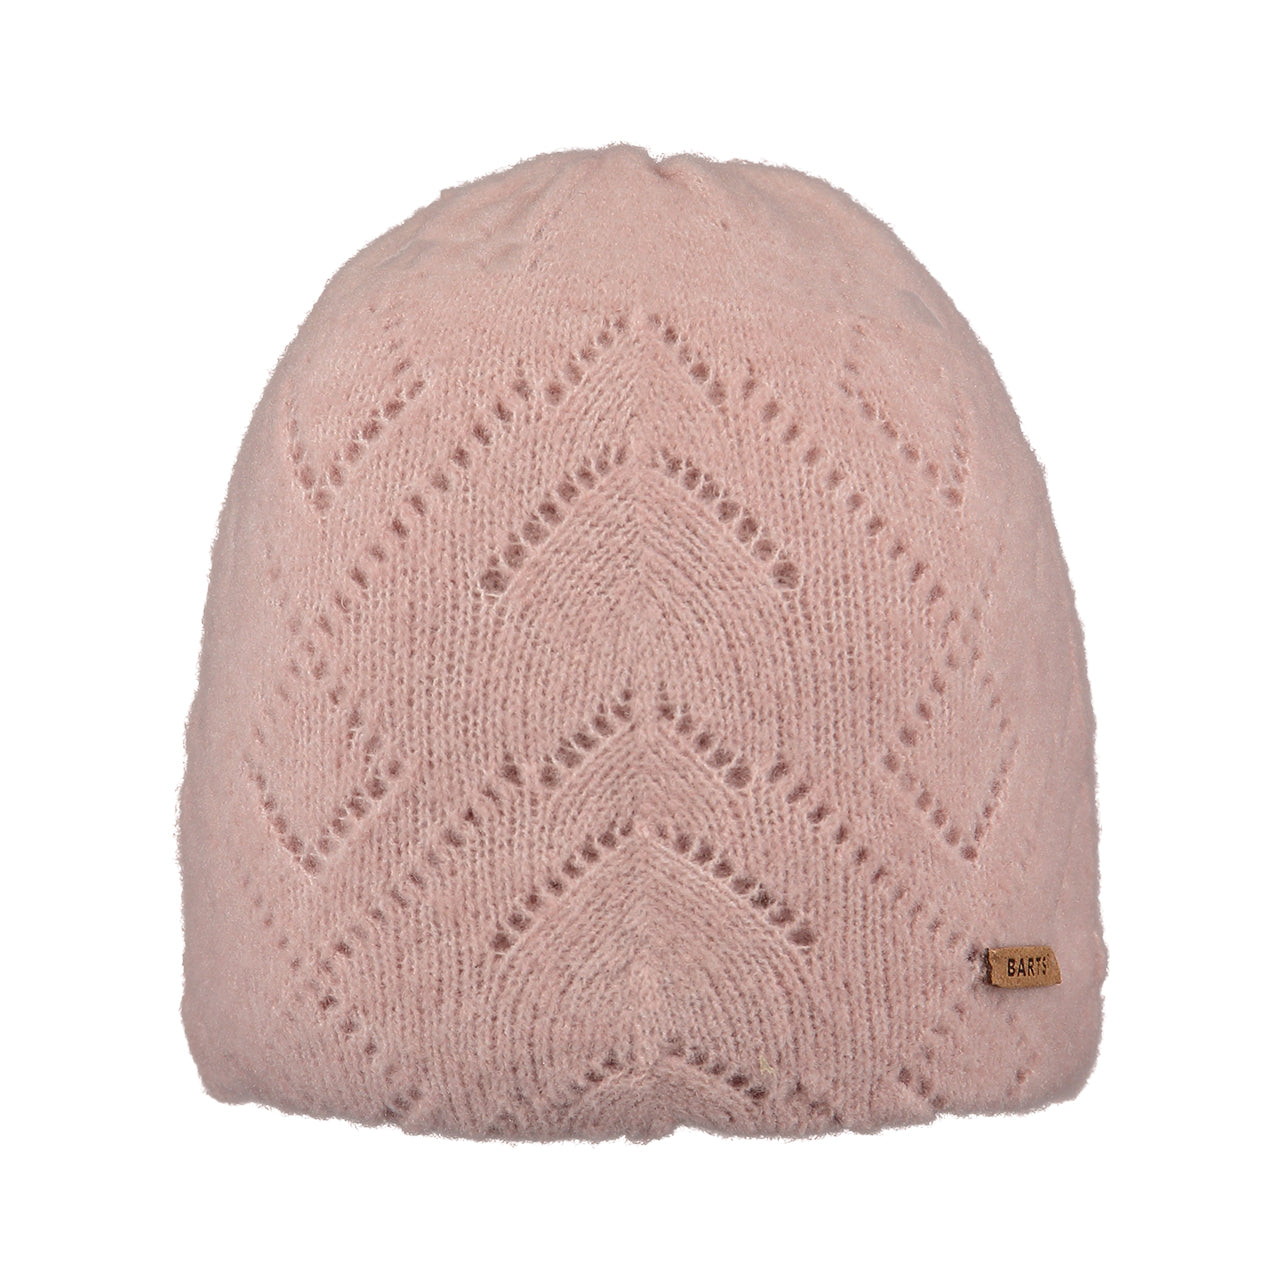 BARTS - mairley beanie - dusty pink - size 53/55